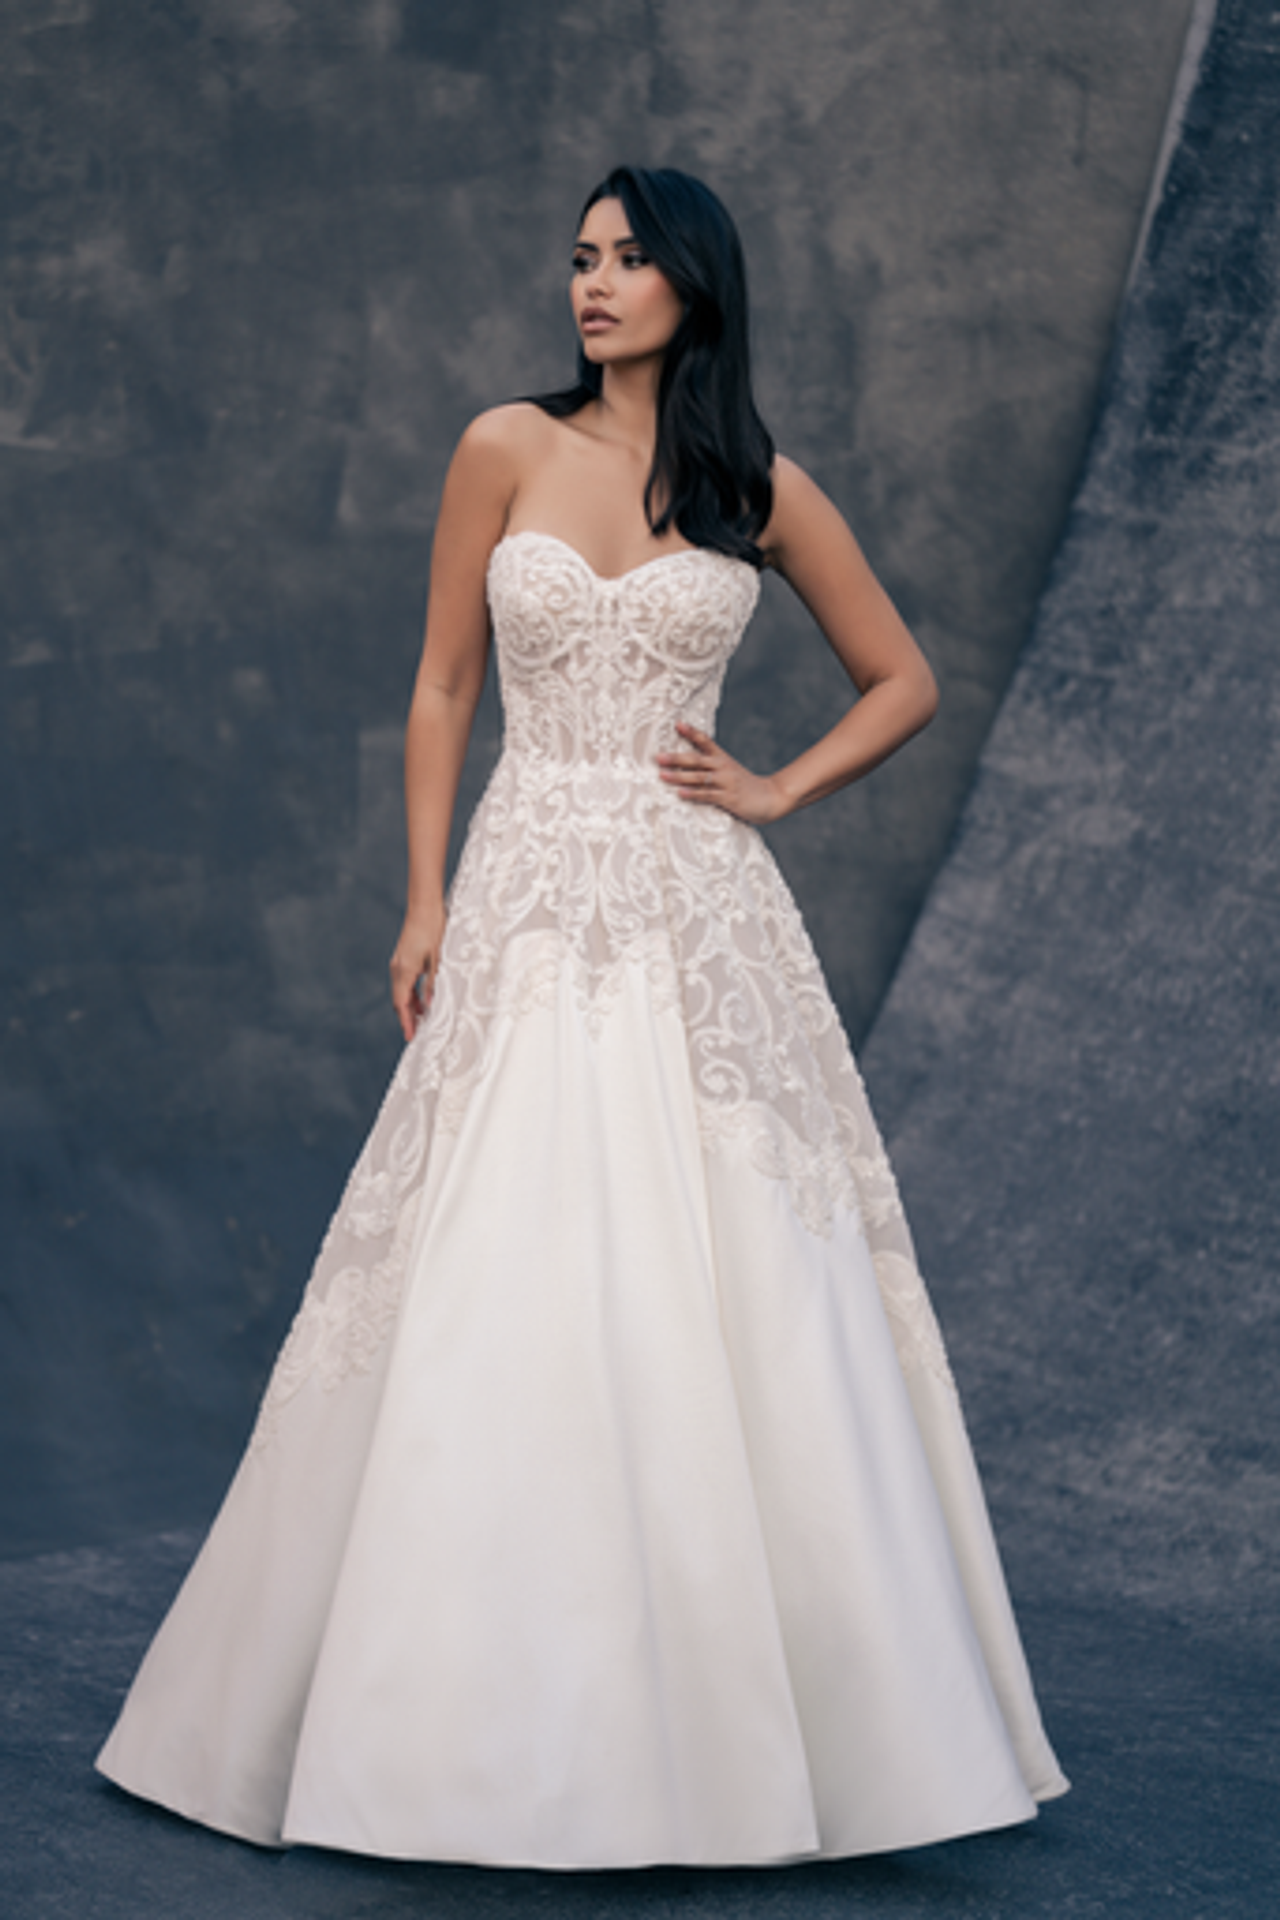 Classic And Romantic Strapless Silk Gown by Allure Bridals - Image 1